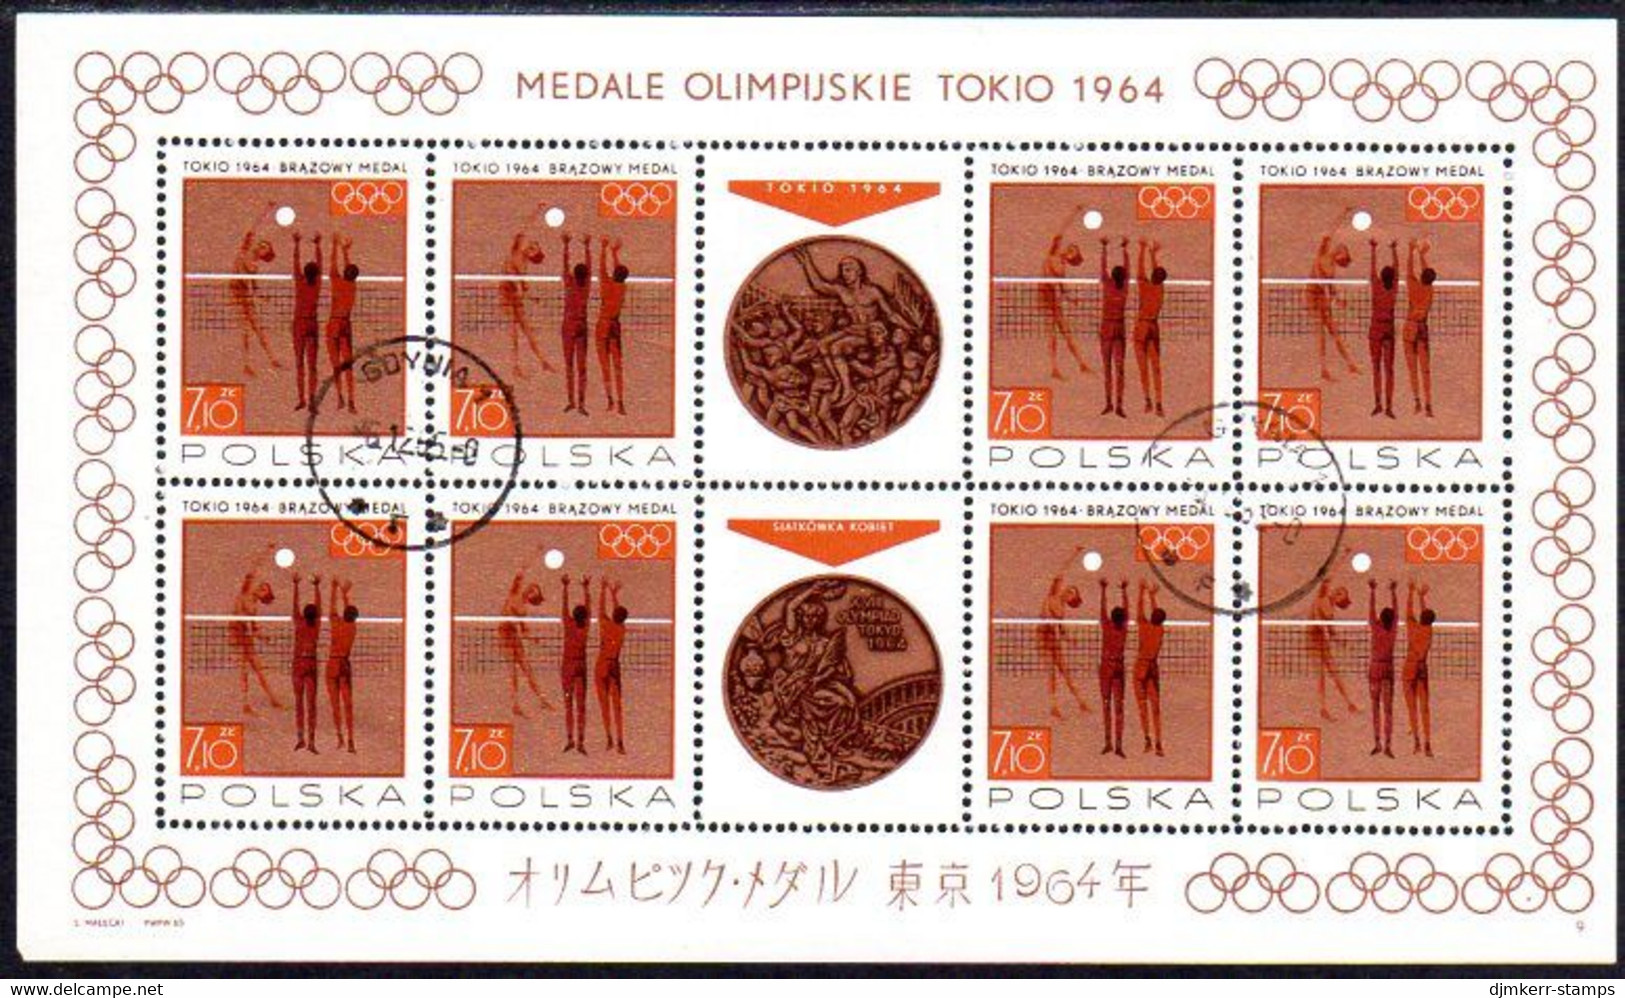 POLAND 1965 Olympic Medal Winners sheetlets used.  Michel 1623-30 Kb